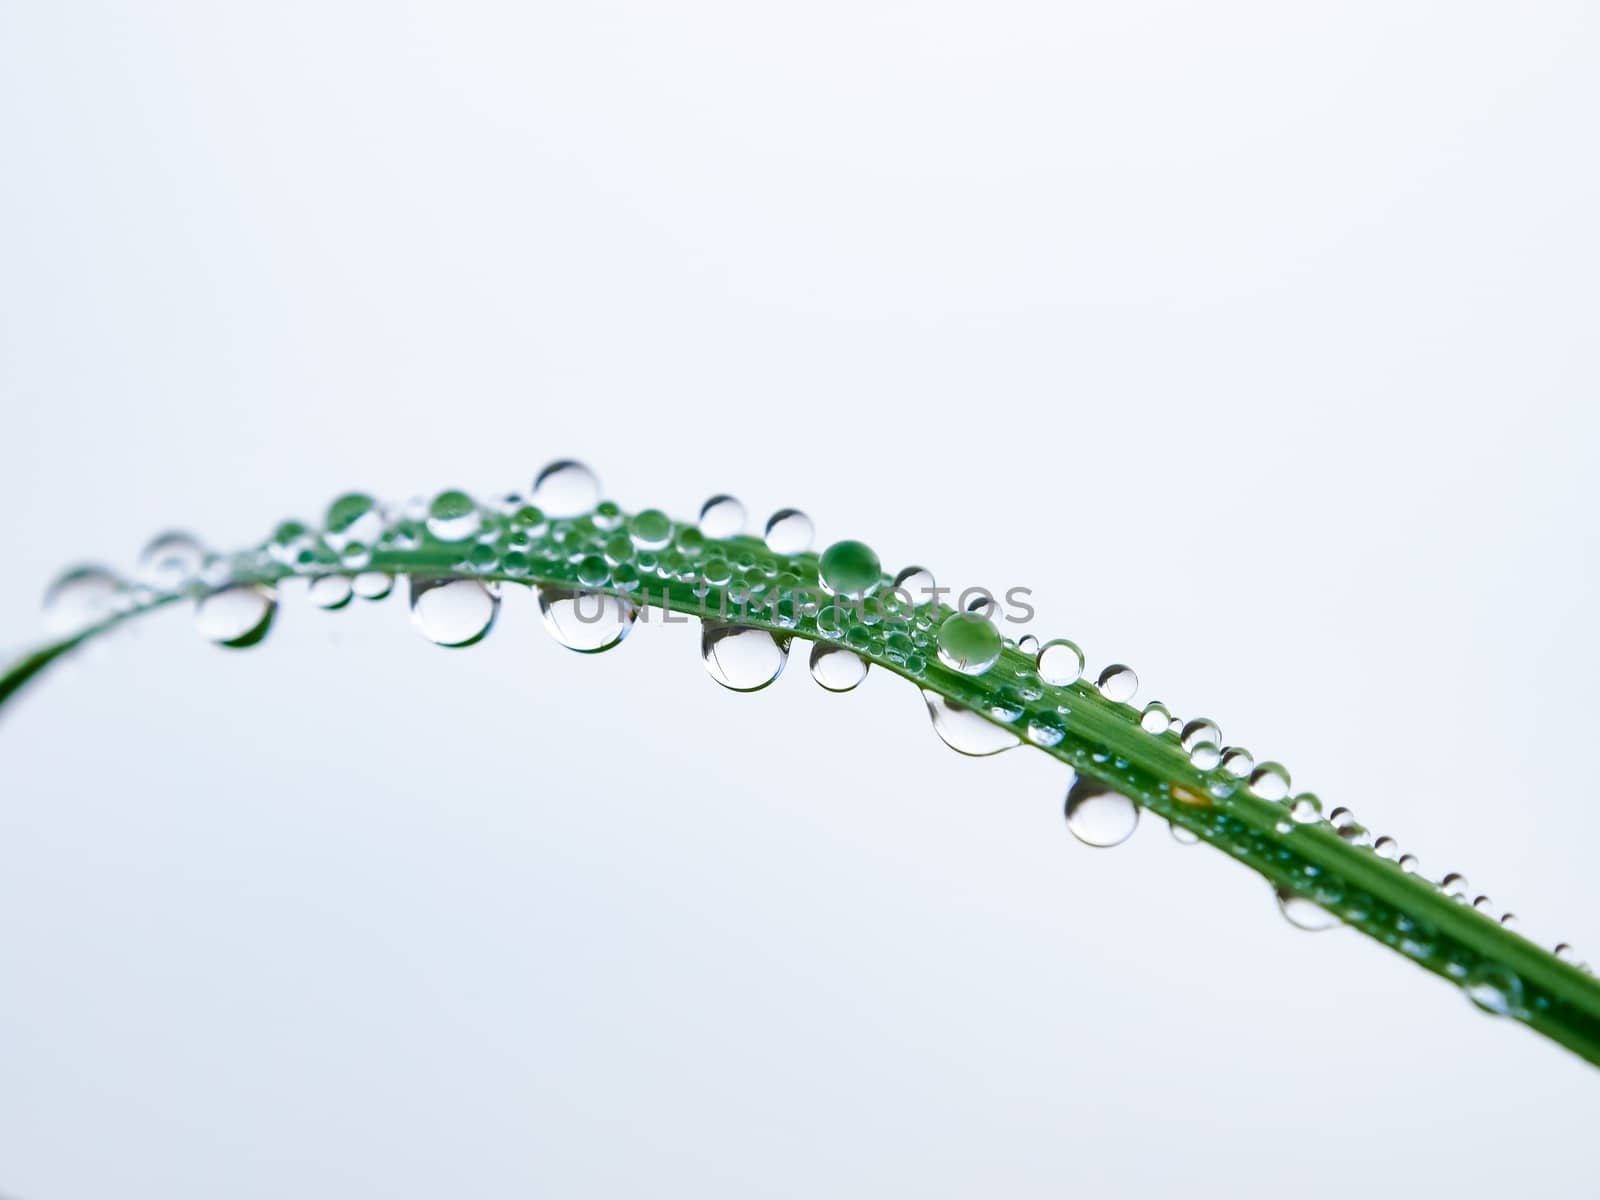 Green leaves with dew drops on white background.